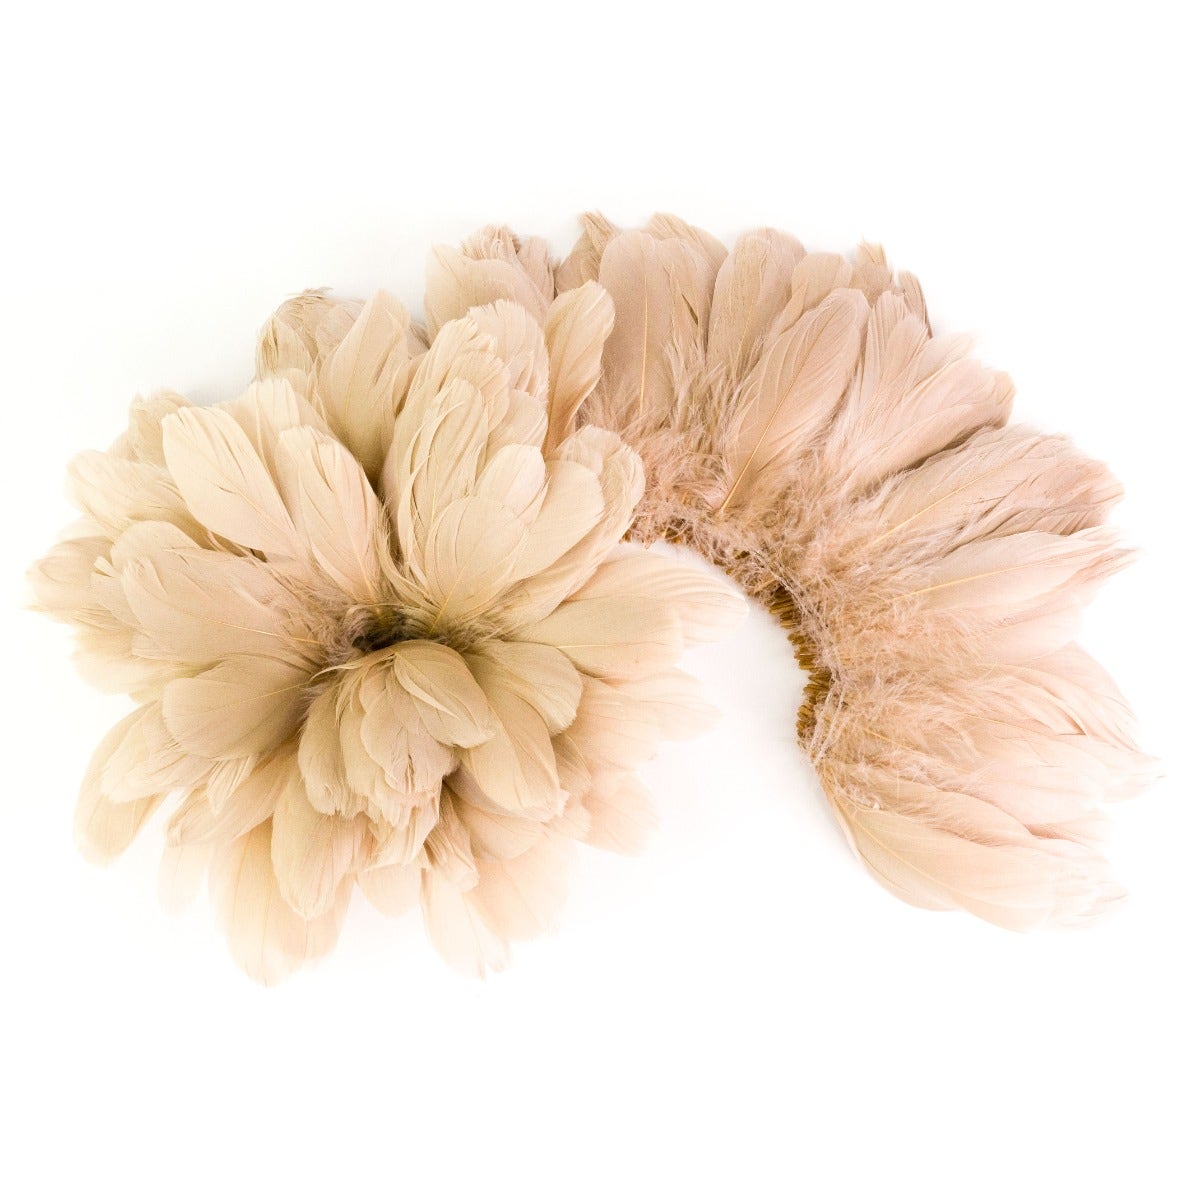 Goose Nagorie Dyed Feathers -Beige